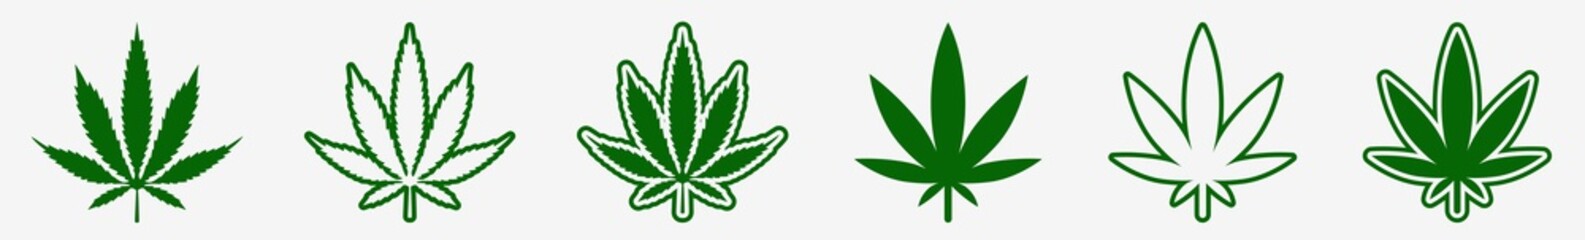 Cannabis Leaf Icon Set Green | Cannabis Leaves Vector Illustration Logo | Cannabis Leaf Icons Isolated Collection